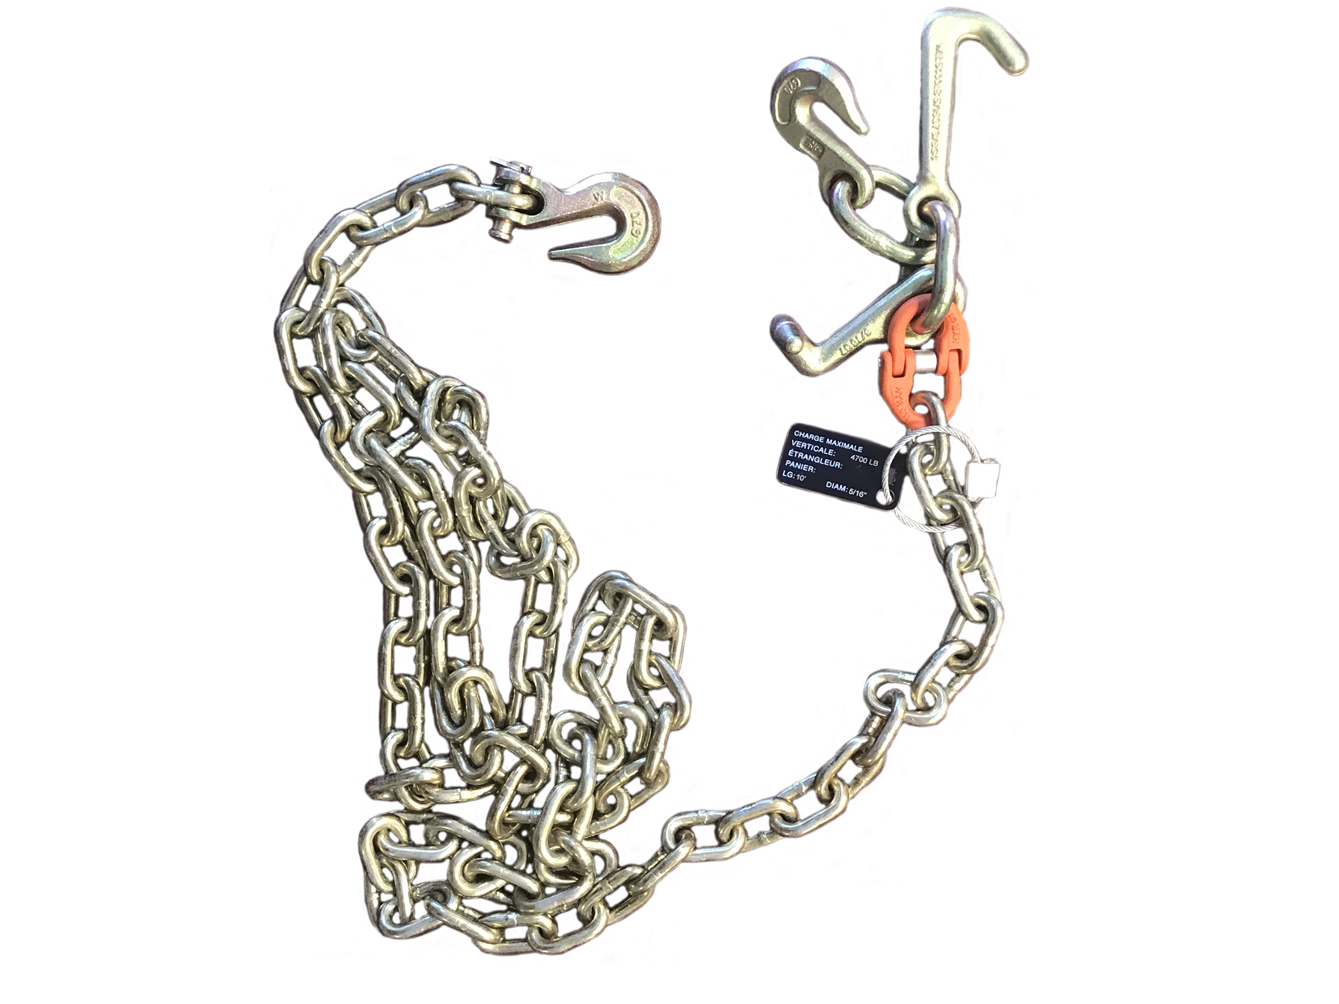 Grade 70 chain sling for towing